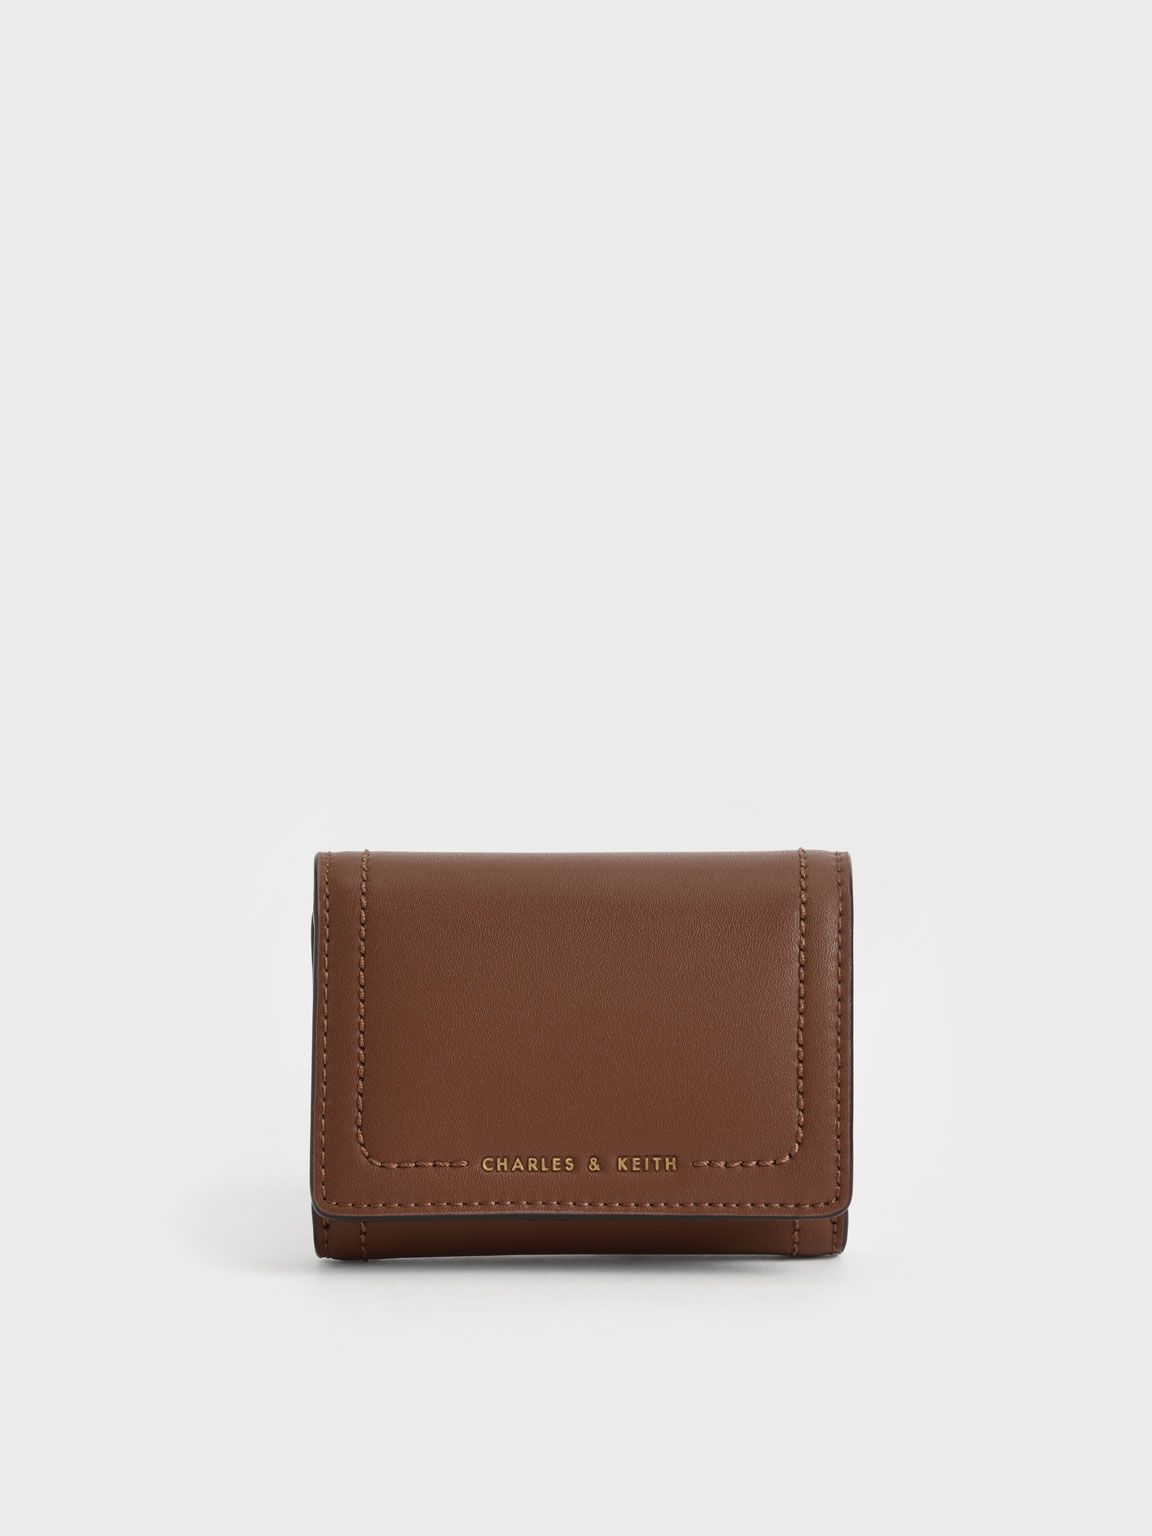 Compact Chic: Keep Your Essentials Handy with Small Wallets